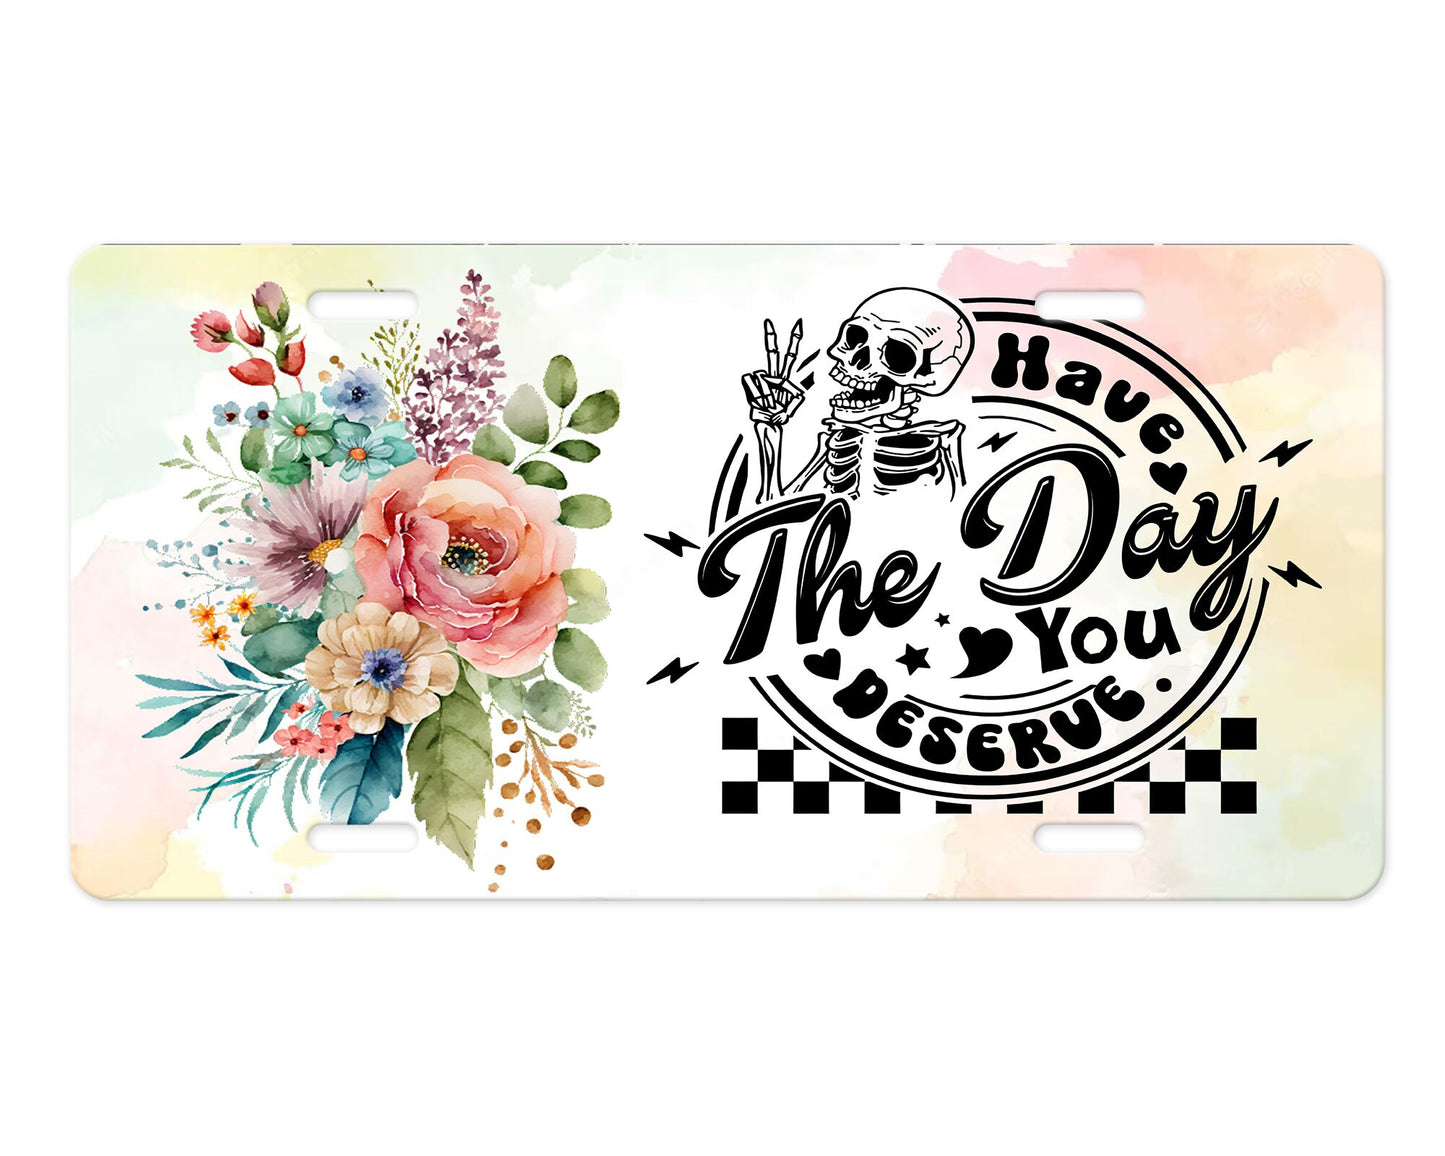 Have the Day You Deserve Aluminum Vanity License Plate Car Accessory Decorative Front Plate